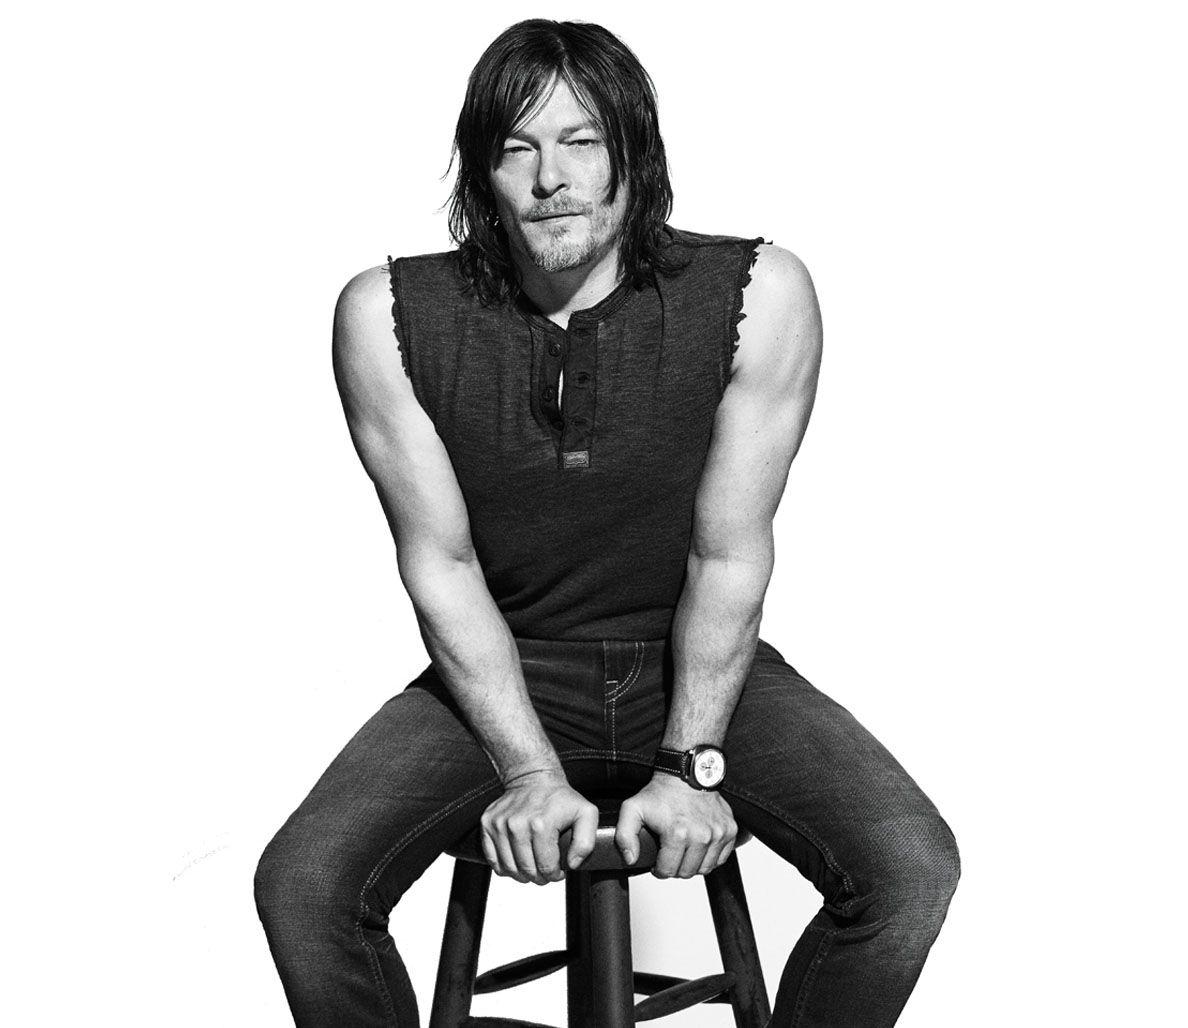 Behind the Scenes: Norman Reedus' March 2016 Cover Shoot.